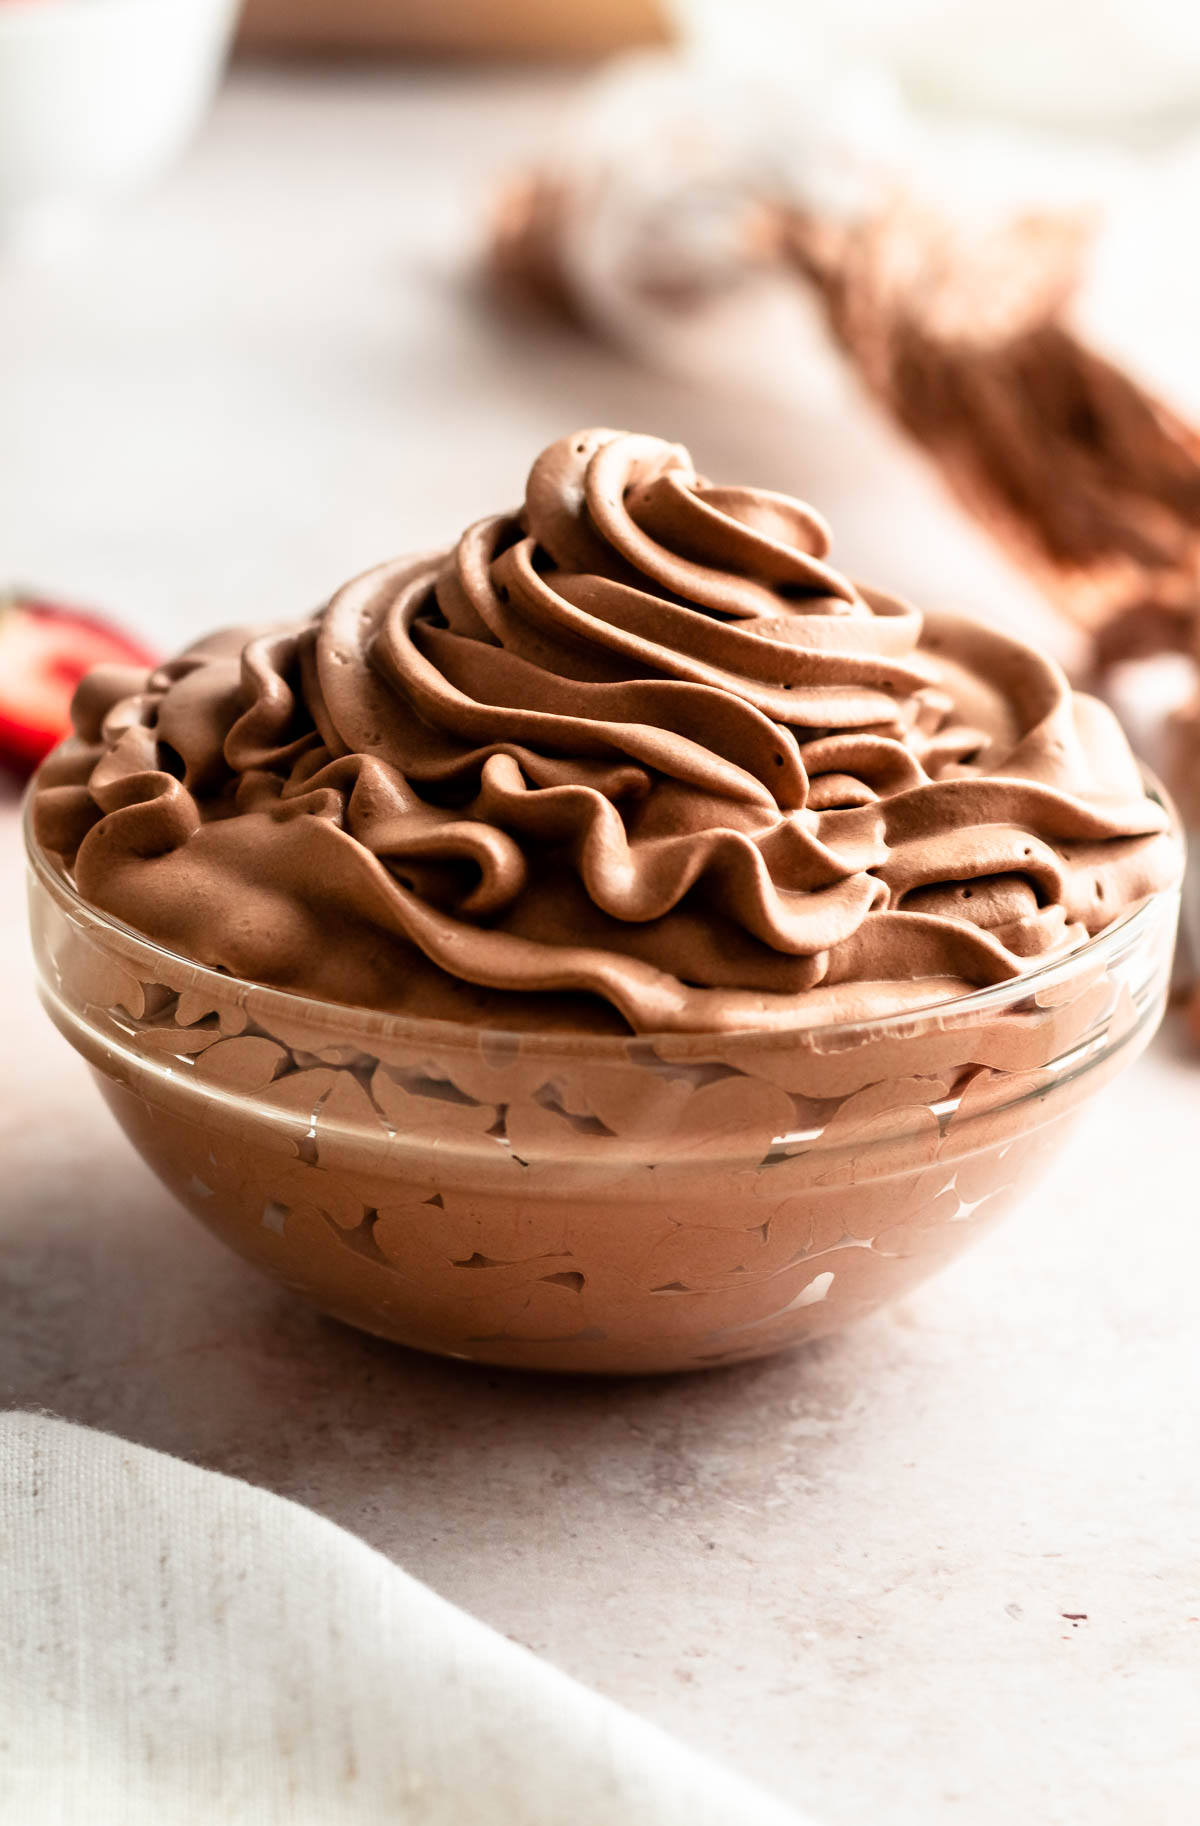 Piped chocolate whip cream in a bowl.